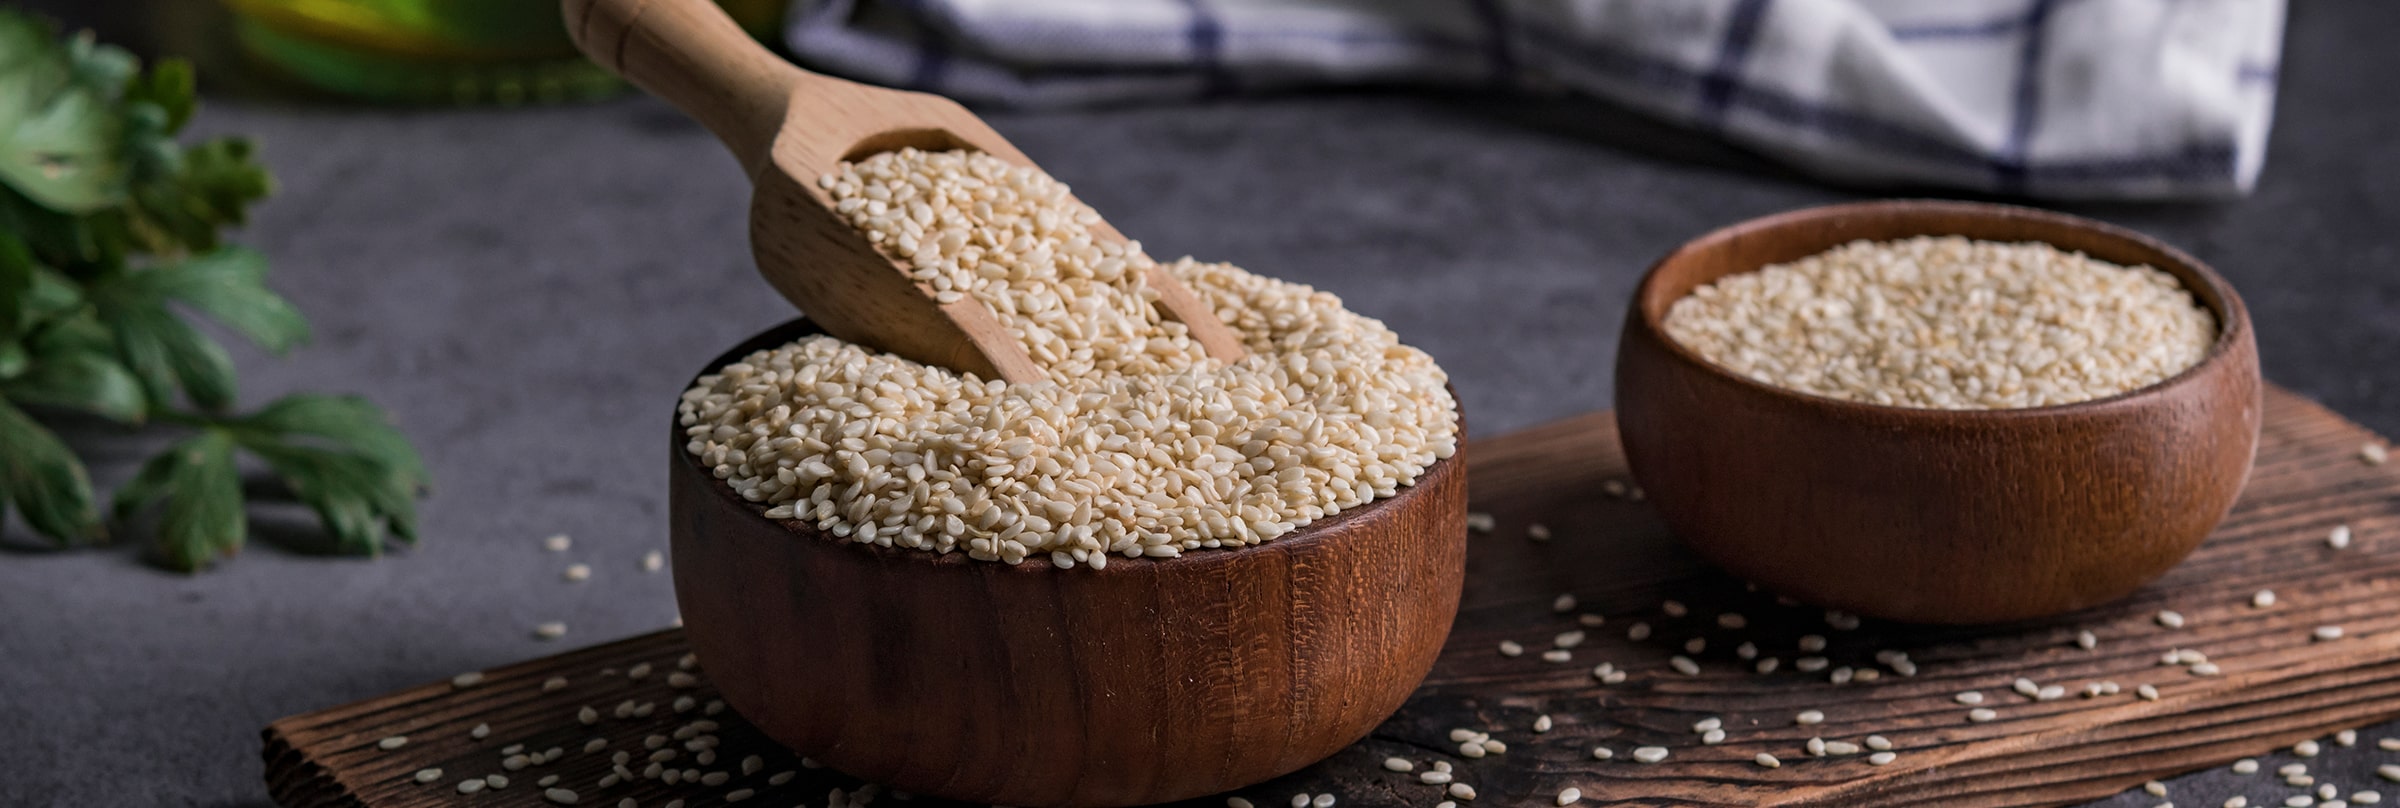 Sesame Seeds and Food Allergies header image with sesame seeds in a bowl